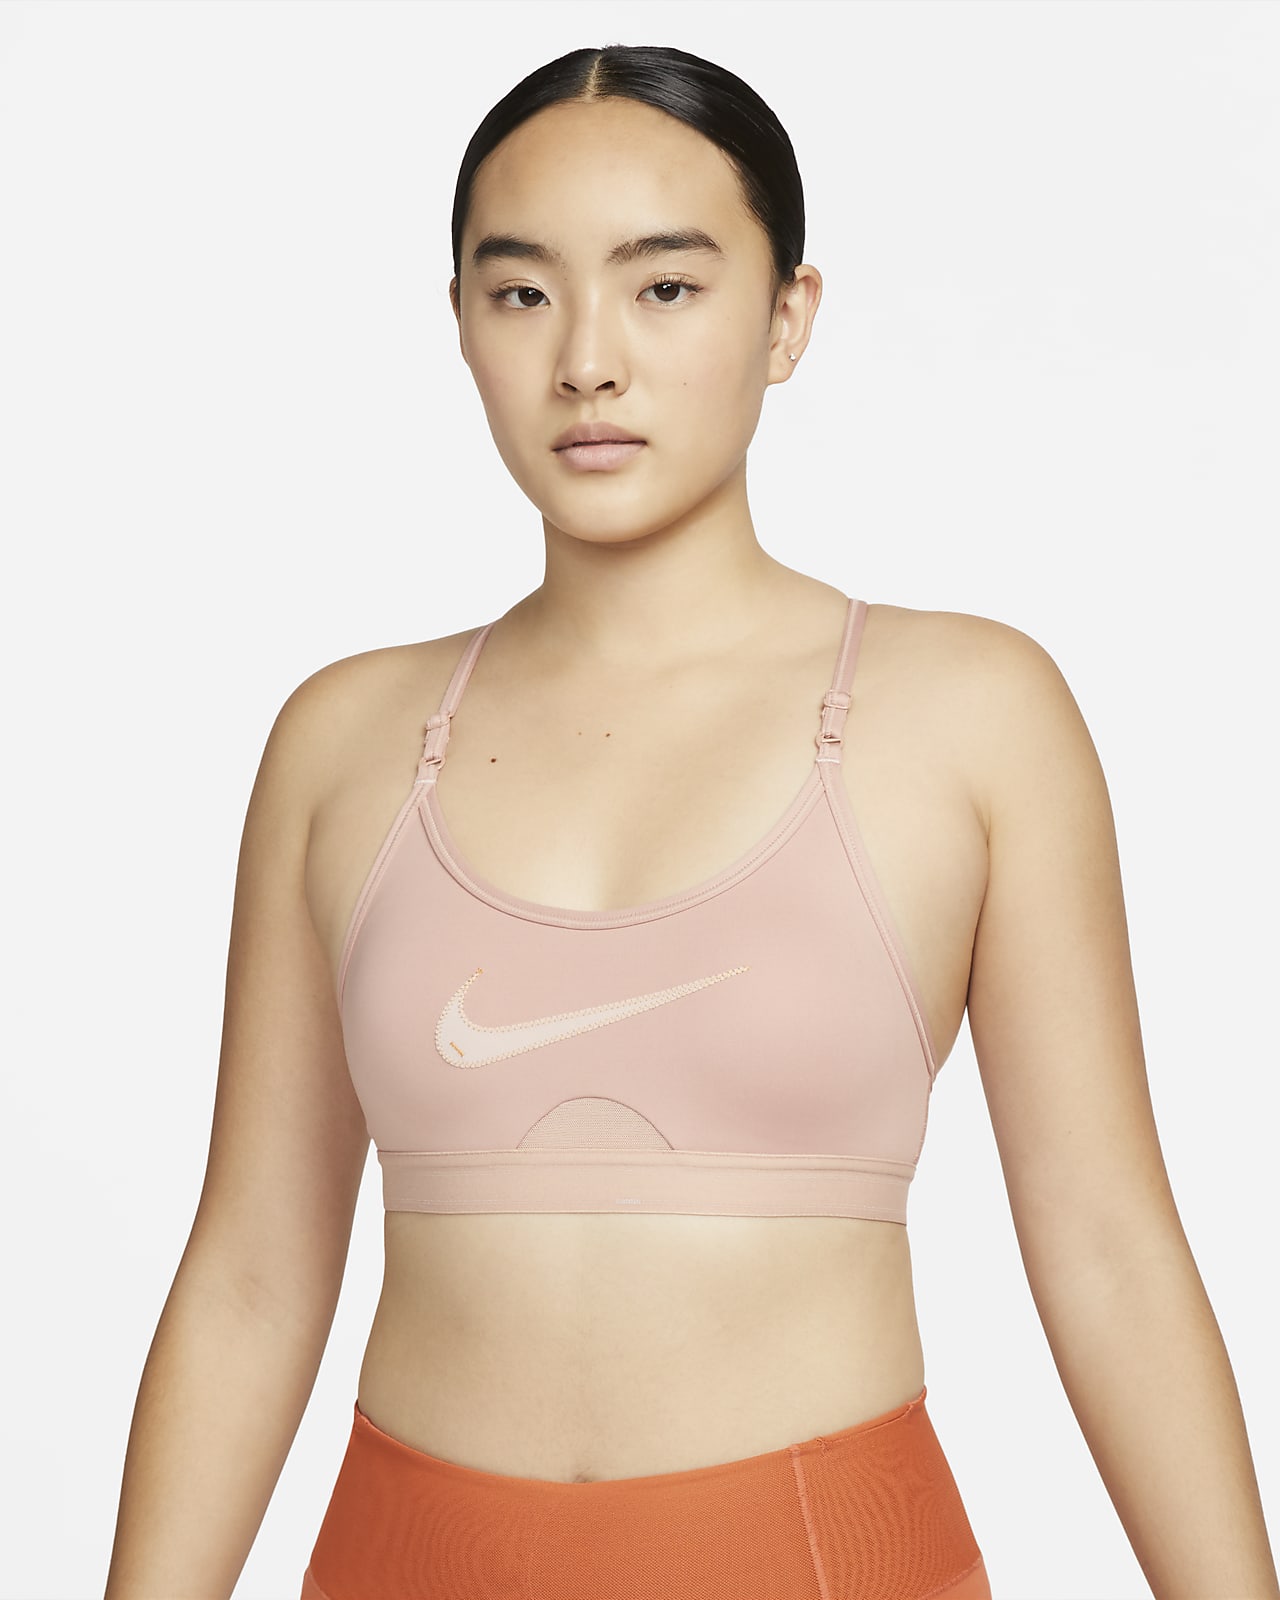 Nike Indy Women's Light-Support Padded Graphic Sports Bra